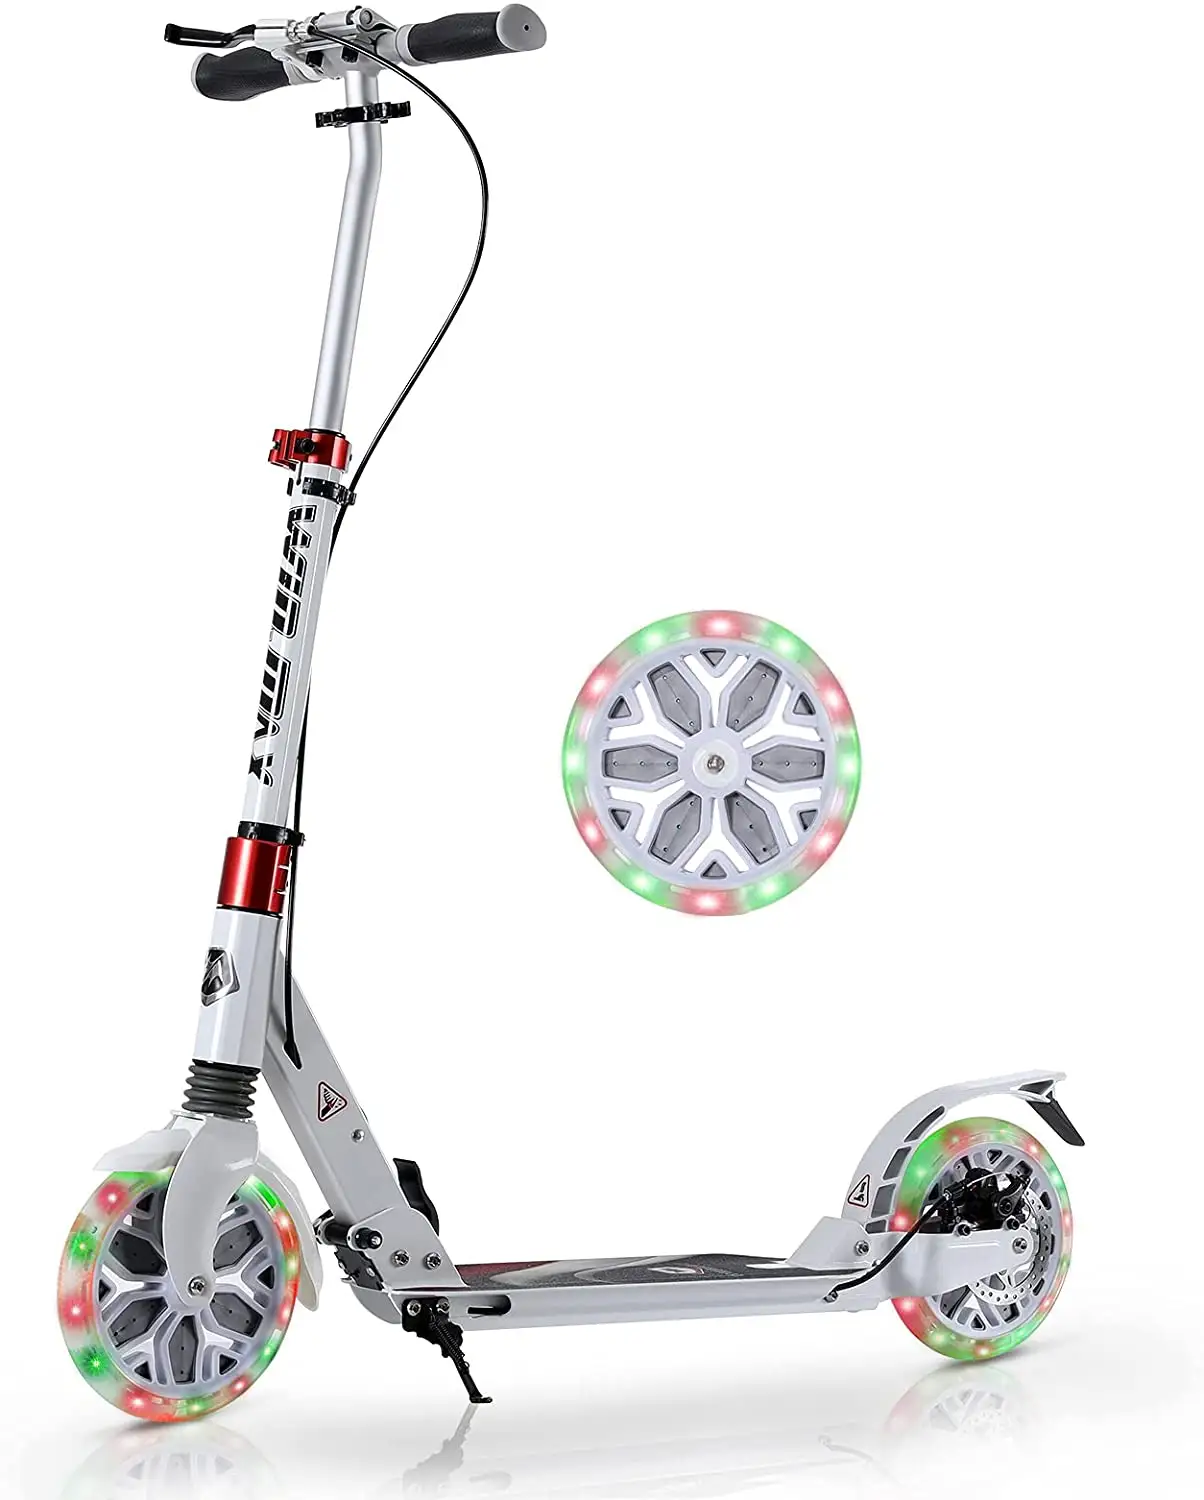 High Quality Adult Kick Scooters LED Wheels Self-Balancing Foldable Electric Scooters